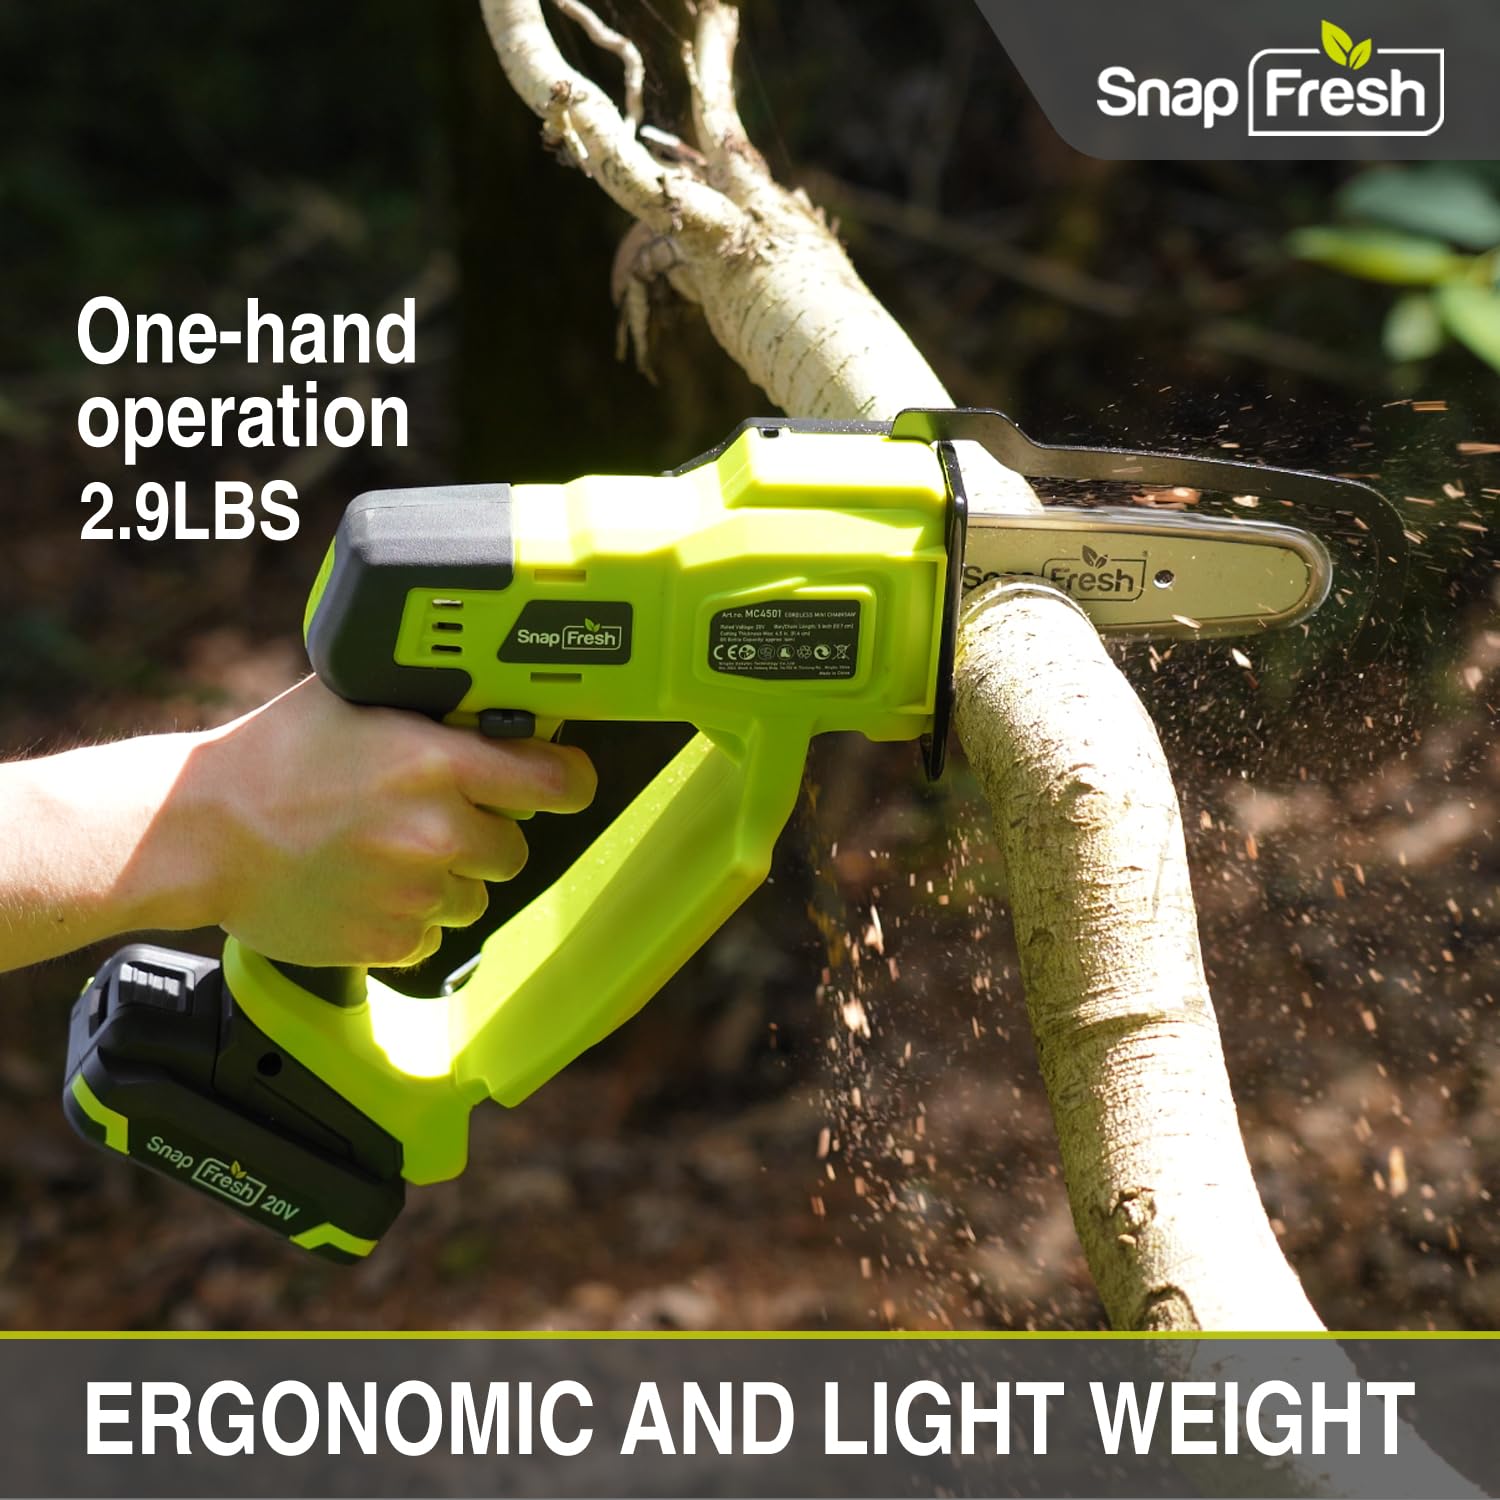 SnapFresh Mini Chainsaw Cordless, 5 Inch Electric Chain Saw Portable Handheld Chain Saw With 2.0Ah Battery & Fast Charger, Security Lock, for Tree Branches, Courtyard Garden